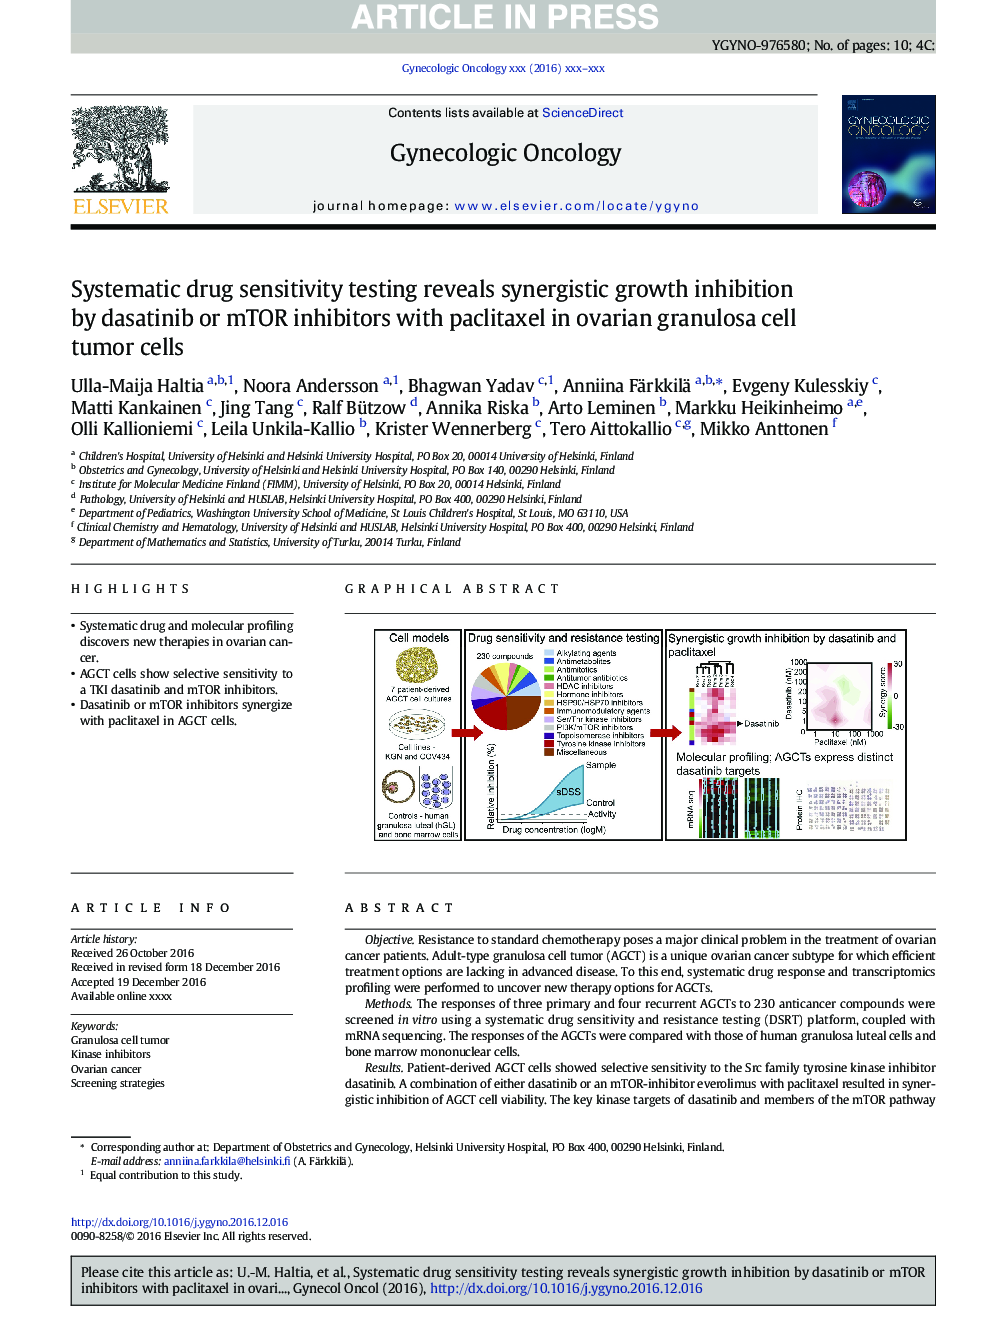 Systematic drug sensitivity testing reveals synergistic growth inhibition by dasatinib or mTOR inhibitors with paclitaxel in ovarian granulosa cell tumor cells